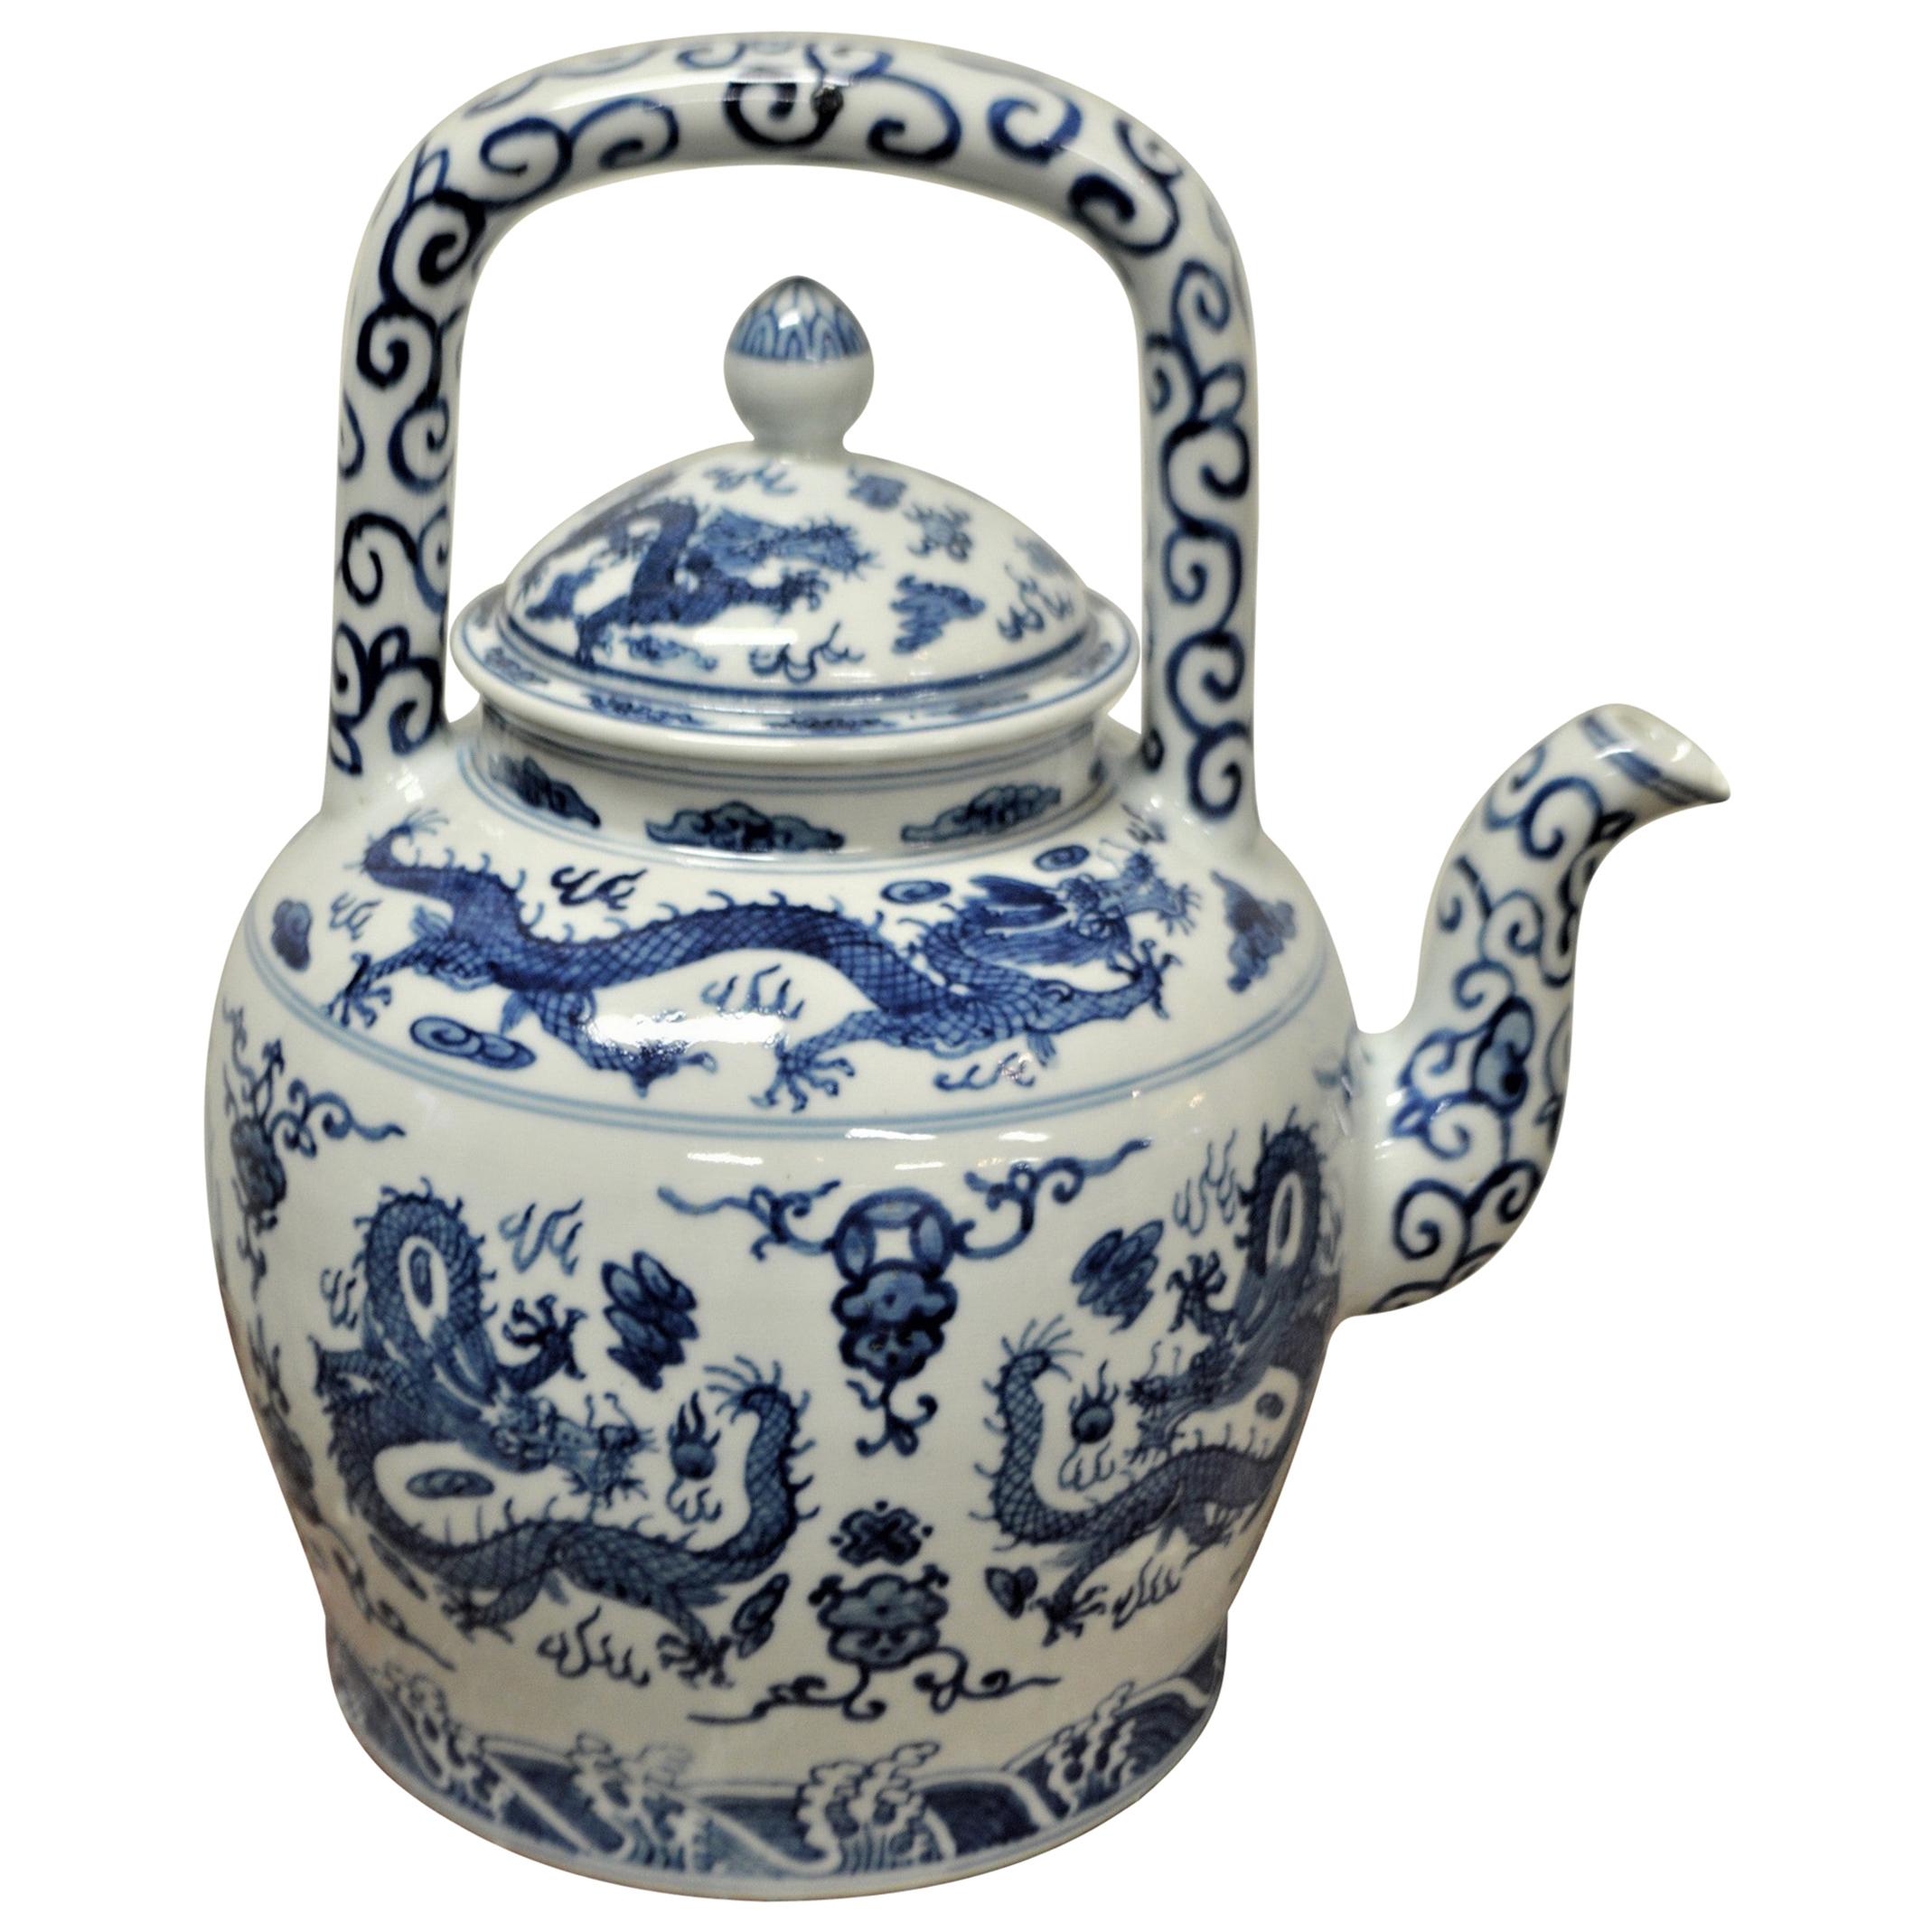 Large Blue and White Decorative Chinese Porcelain Tea Pot with Dragon Design